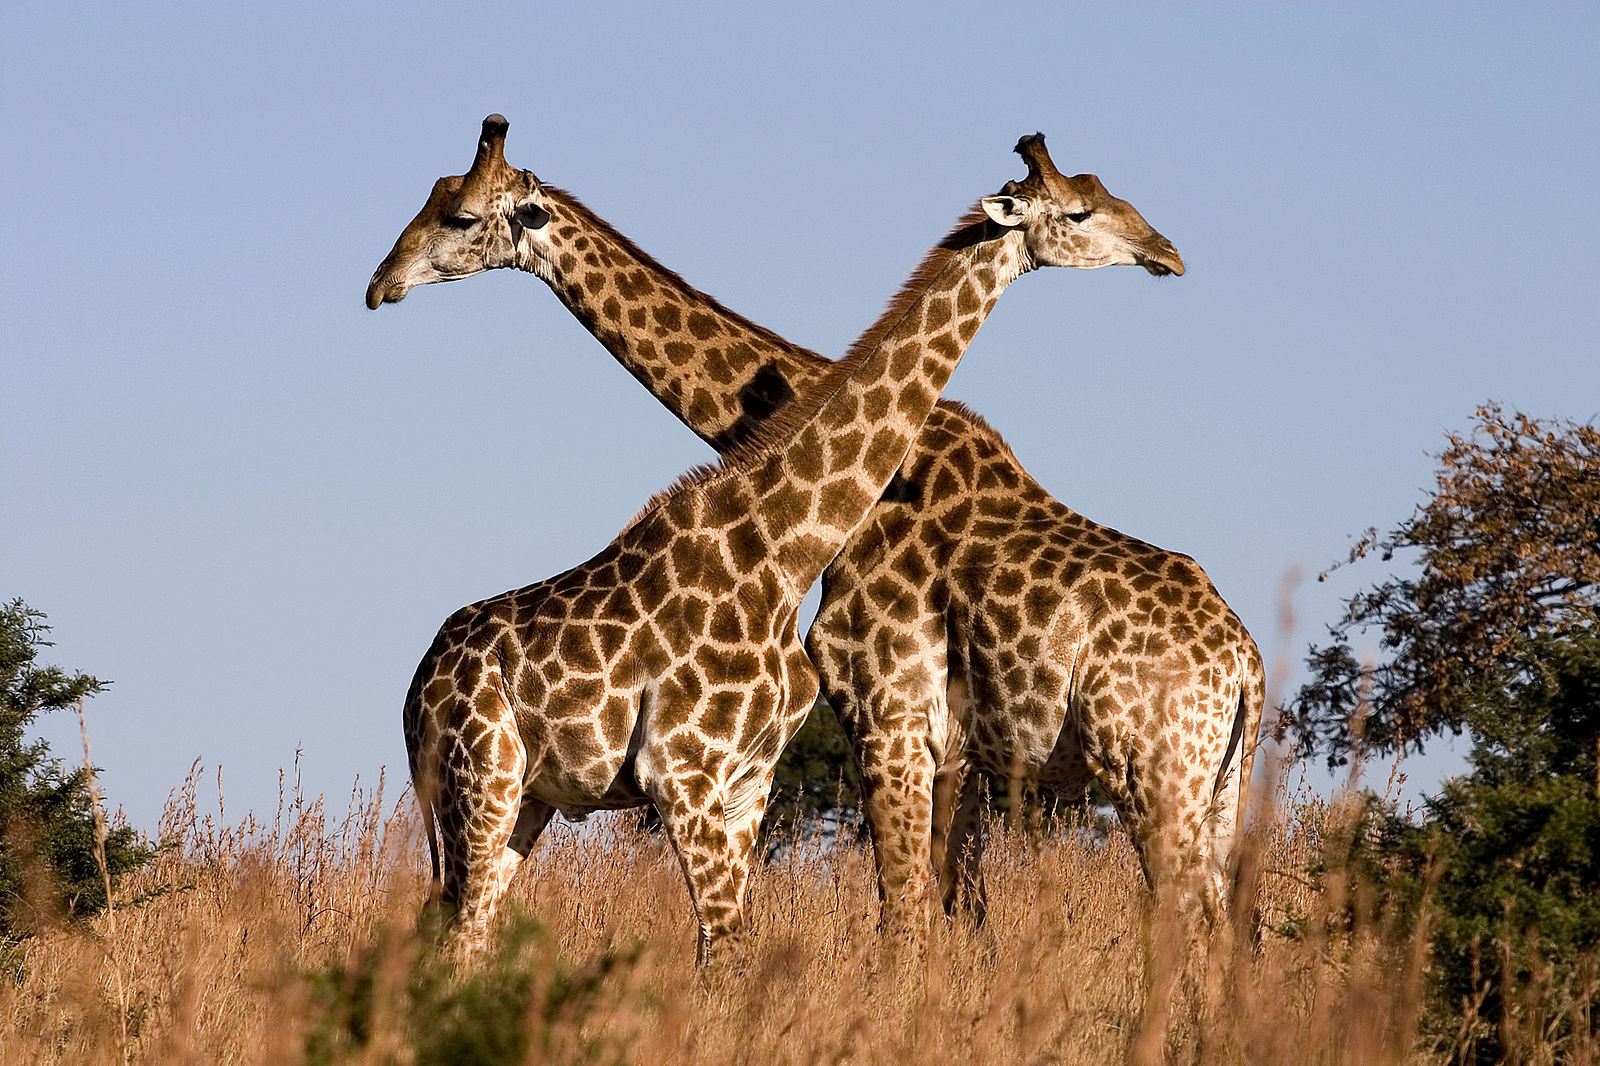 What happens to the blood pressure in a giraffe's neck when it stoops to drink?